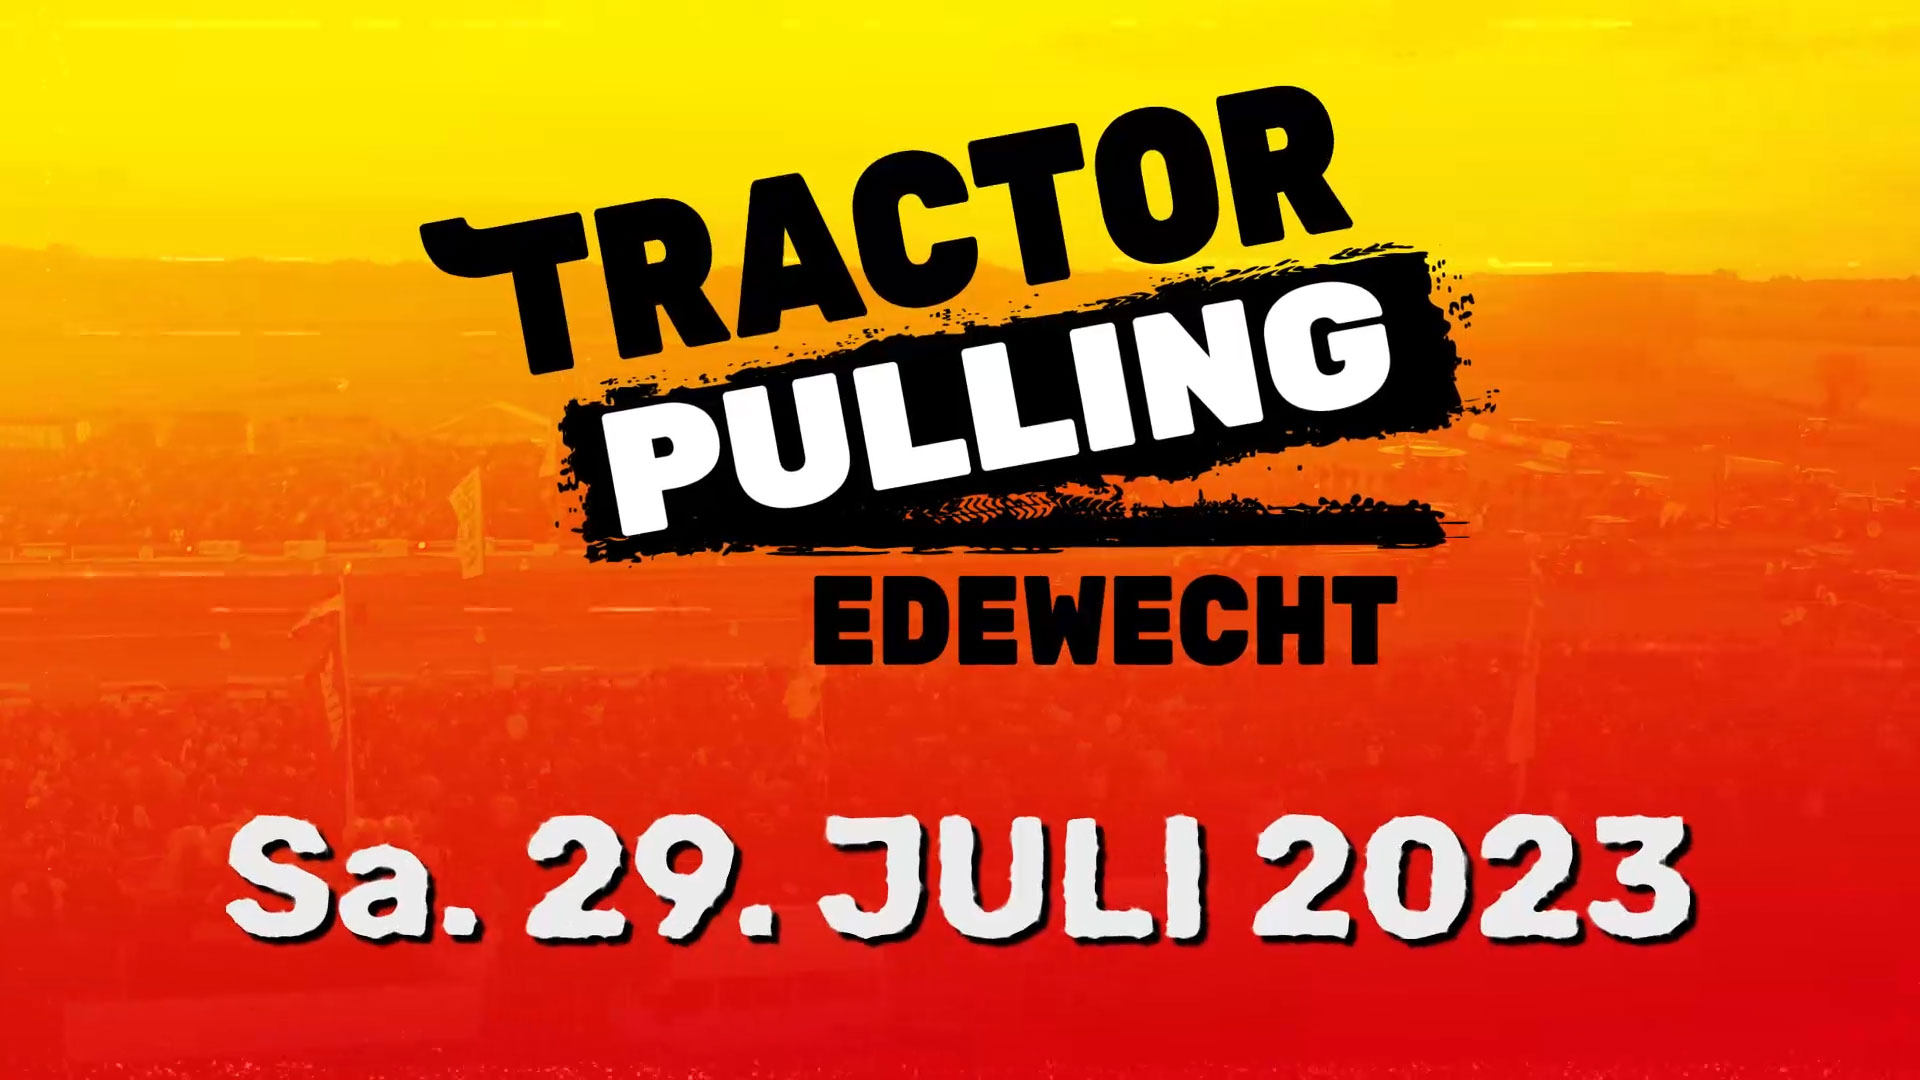 Tractor Pulling Edewecht — Full is Pull not enough